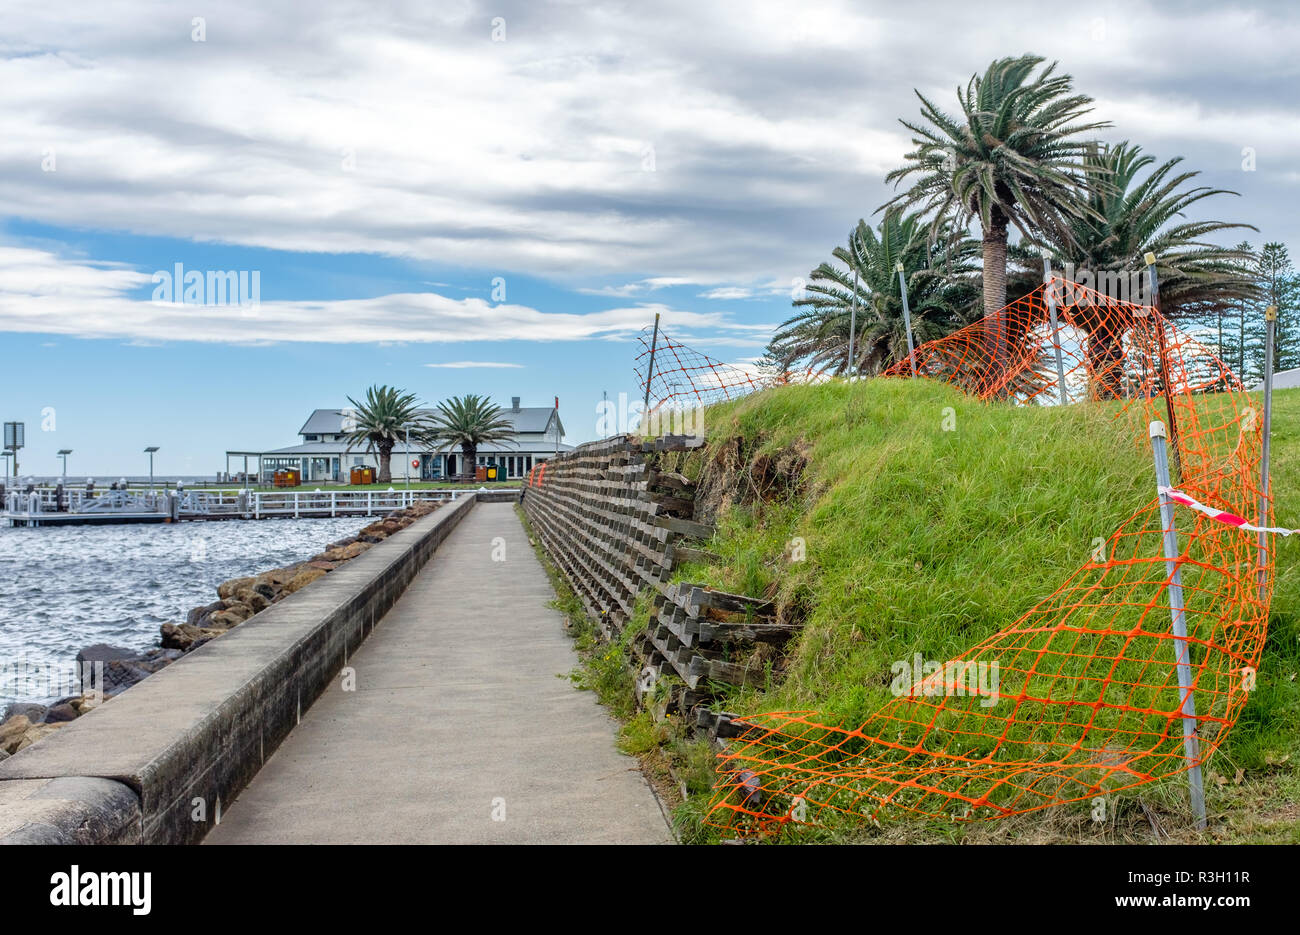 climate change erosion damage to harbour wall reinforcements caused by storm damage after extreme weather event to harbour wall, NSW, Australia Stock Photo